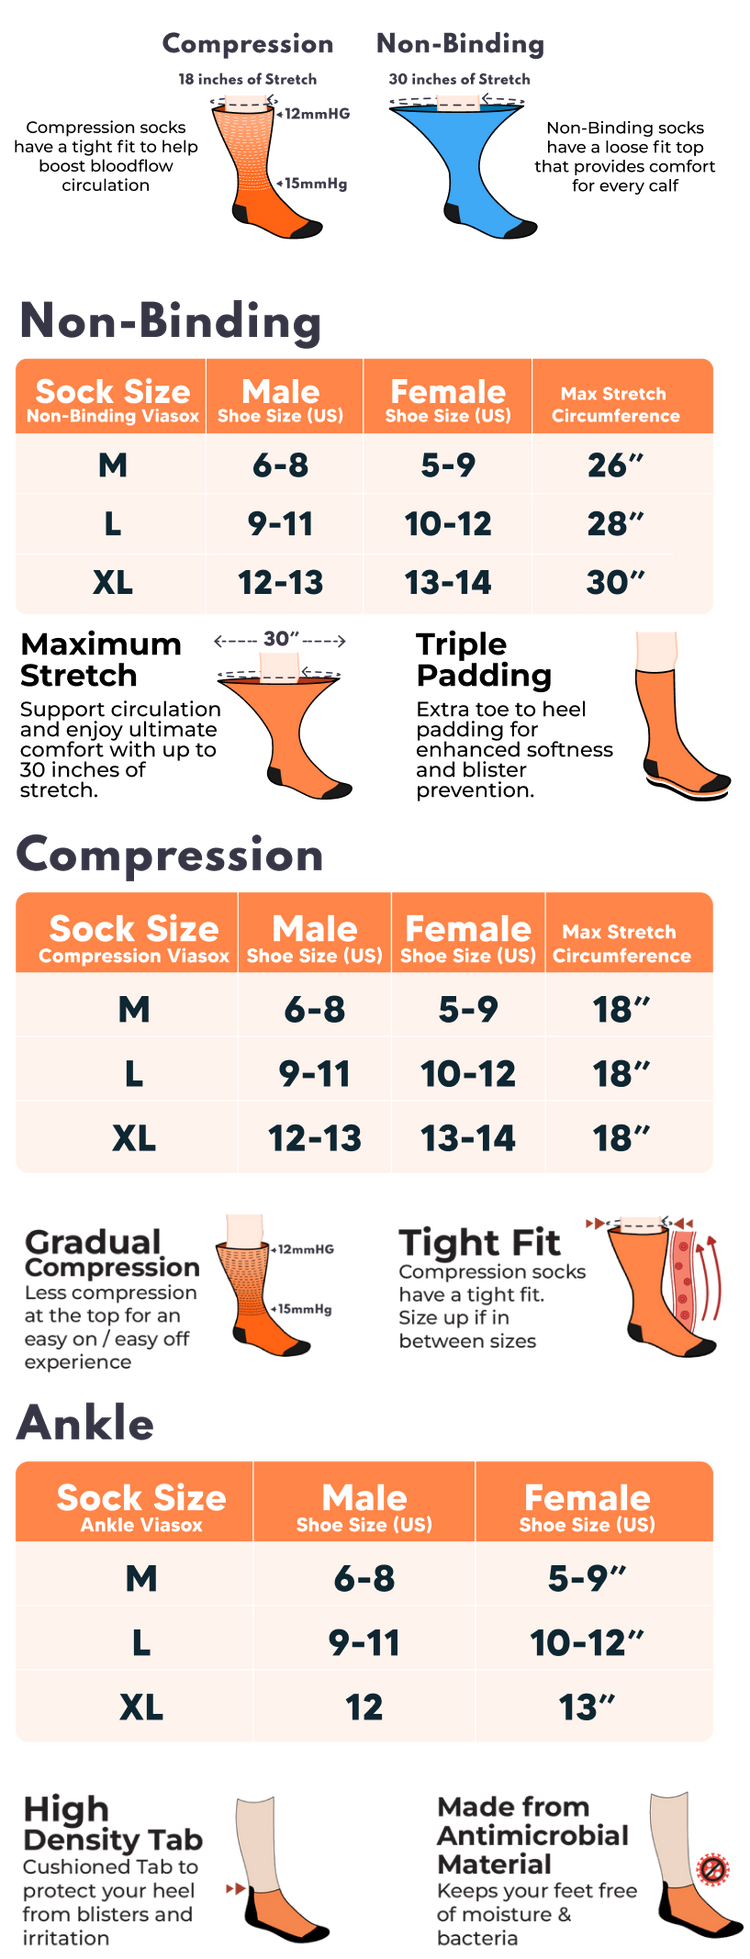 How Do I Find My Sock Size? Socks Addict's Guide to Sock Sizes